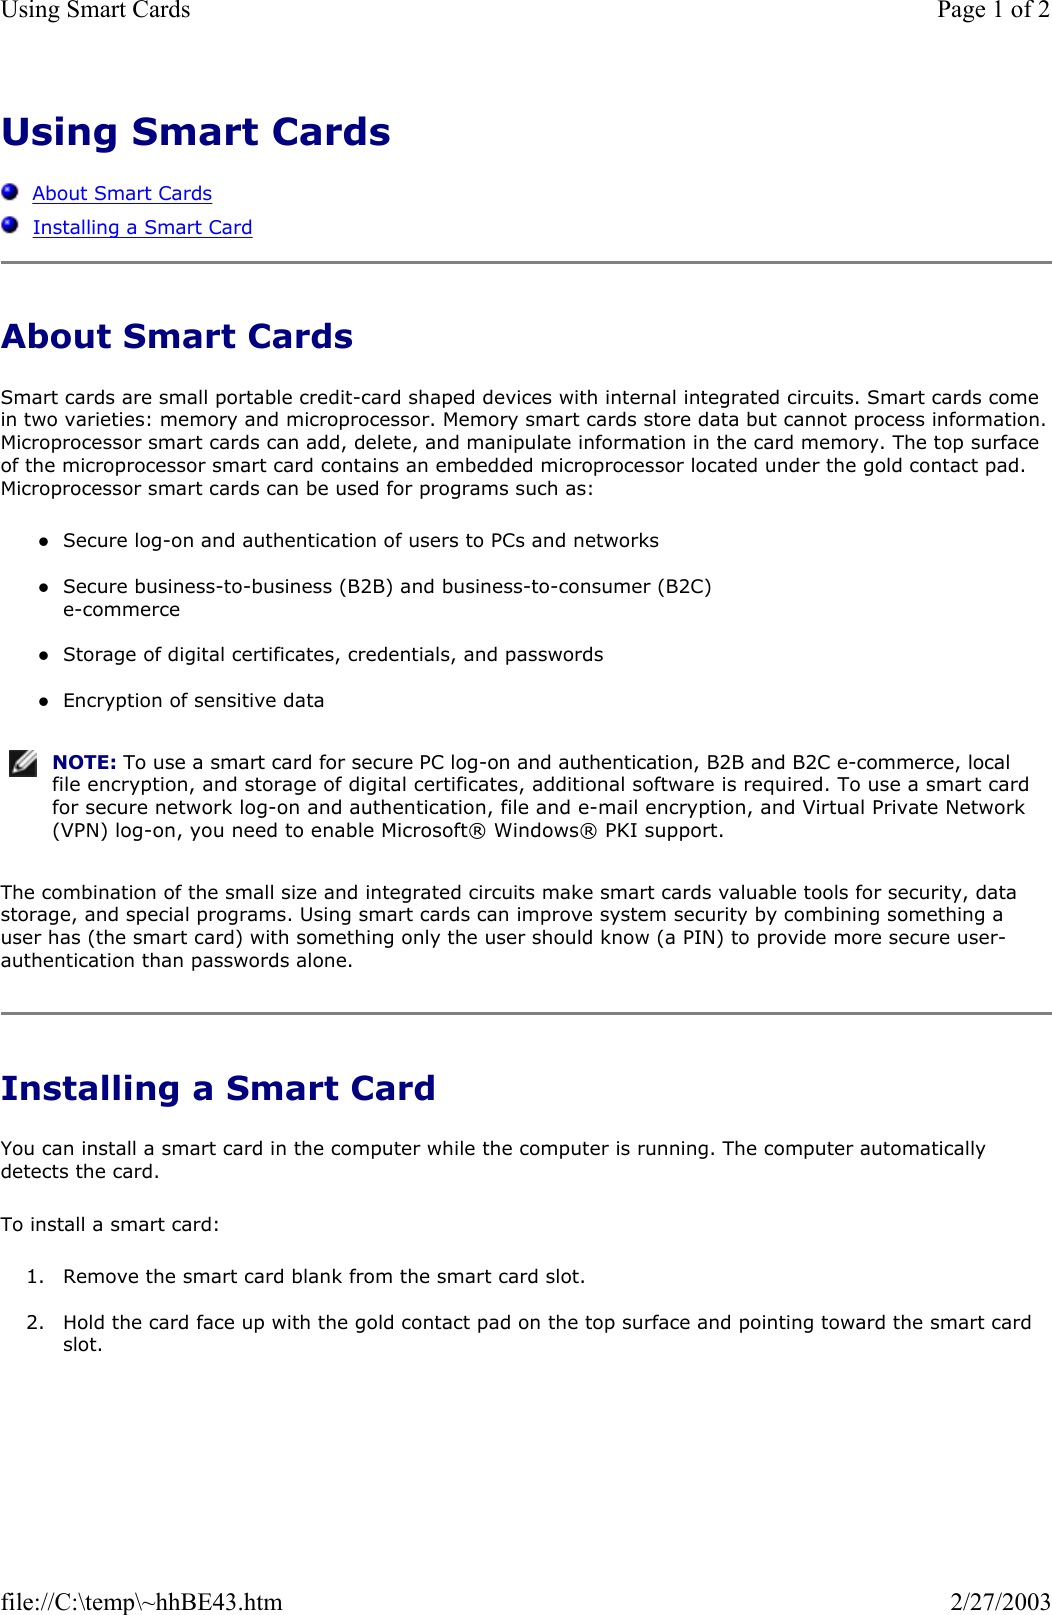 Using Smart Cards      About Smart Cards   Installing a Smart Card About Smart Cards Smart cards are small portable credit-card shaped devices with internal integrated circuits. Smart cards come in two varieties: memory and microprocessor. Memory smart cards store data but cannot process information. Microprocessor smart cards can add, delete, and manipulate information in the card memory. The top surface of the microprocessor smart card contains an embedded microprocessor located under the gold contact pad. Microprocessor smart cards can be used for programs such as: zSecure log-on and authentication of users to PCs and networks  zSecure business-to-business (B2B) and business-to-consumer (B2C)  e-commerce  zStorage of digital certificates, credentials, and passwords  zEncryption of sensitive data  The combination of the small size and integrated circuits make smart cards valuable tools for security, data storage, and special programs. Using smart cards can improve system security by combining something a user has (the smart card) with something only the user should know (a PIN) to provide more secure user-authentication than passwords alone. Installing a Smart Card You can install a smart card in the computer while the computer is running. The computer automatically detects the card. To install a smart card: 1. Remove the smart card blank from the smart card slot.  2. Hold the card face up with the gold contact pad on the top surface and pointing toward the smart card slot.  NOTE: To use a smart card for secure PC log-on and authentication, B2B and B2C e-commerce, local file encryption, and storage of digital certificates, additional software is required. To use a smart card for secure network log-on and authentication, file and e-mail encryption, and Virtual Private Network (VPN) log-on, you need to enable Microsoft® Windows® PKI support.Page 1 of 2Using Smart Cards2/27/2003file://C:\temp\~hhBE43.htm